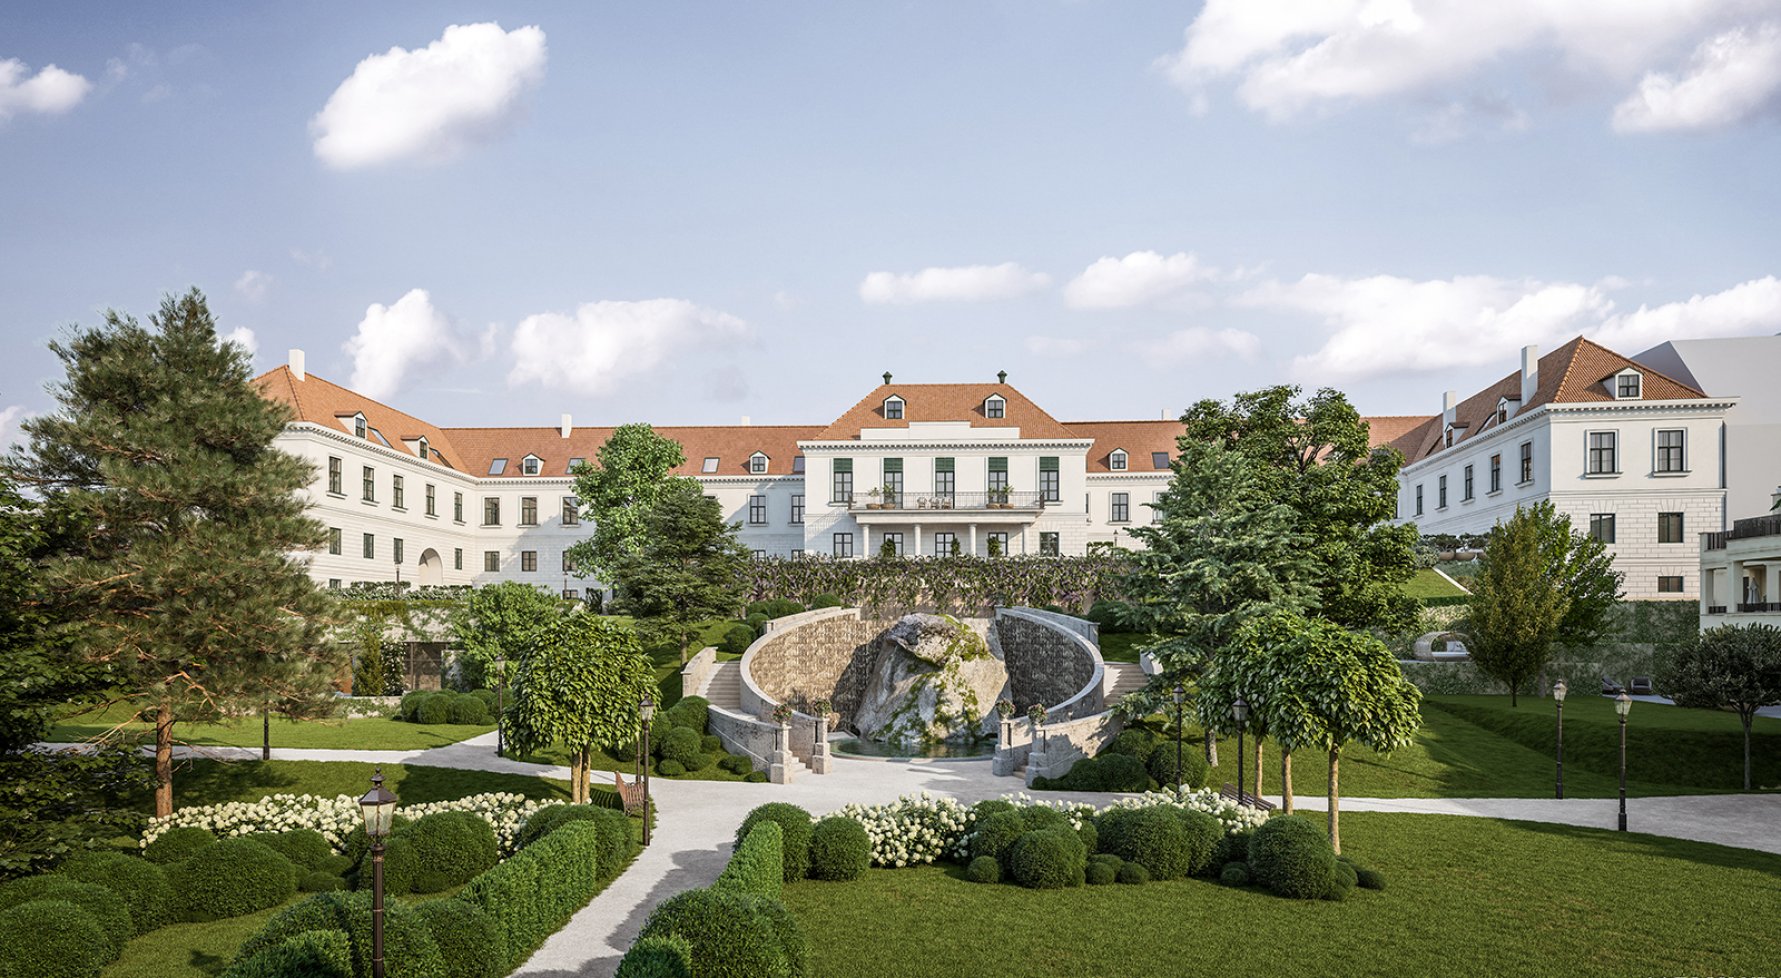 Property in 1190 Wien - Döbling: Symbiosis of historic castle and modern urbanity in a gated community - picture 1